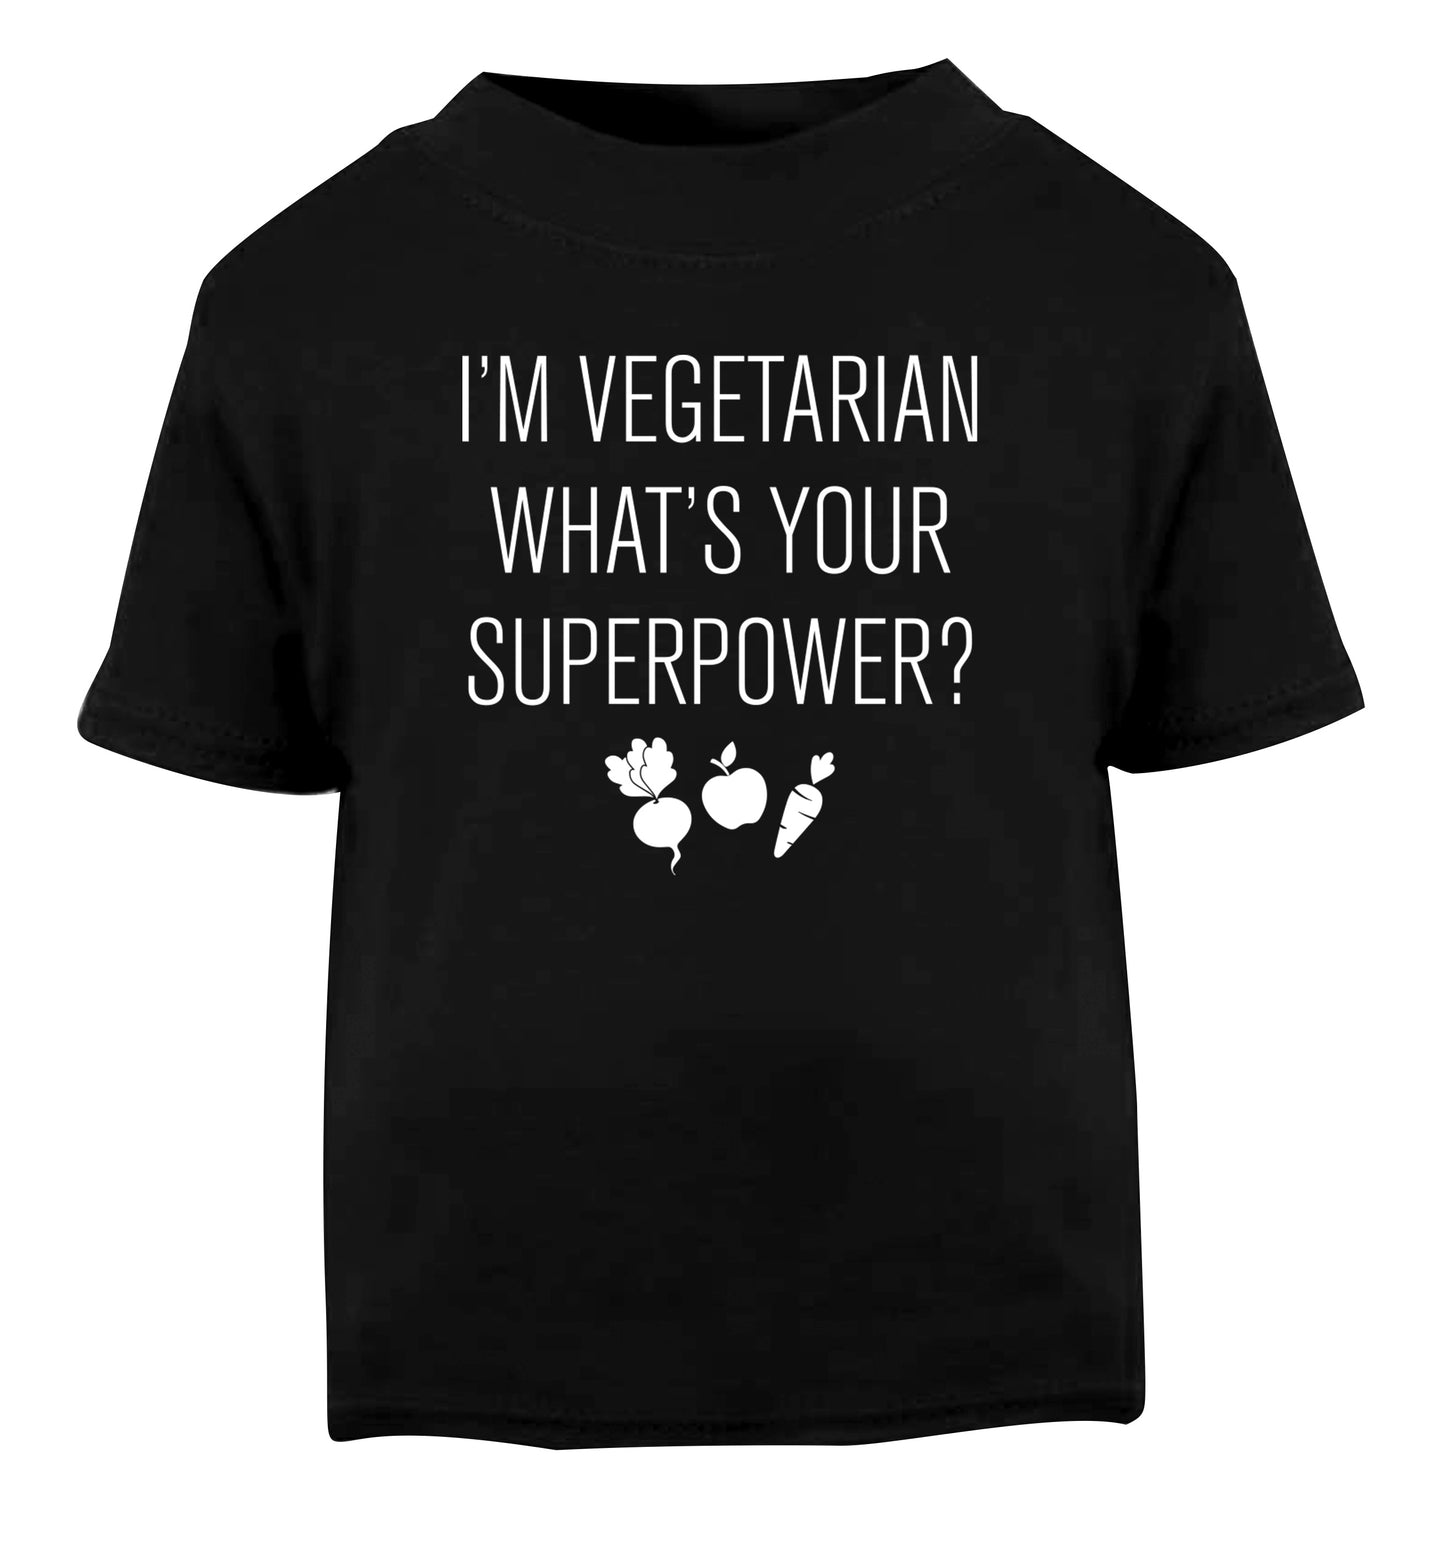 I'm vegetarian what's your superpower? Black Baby Toddler Tshirt 2 years